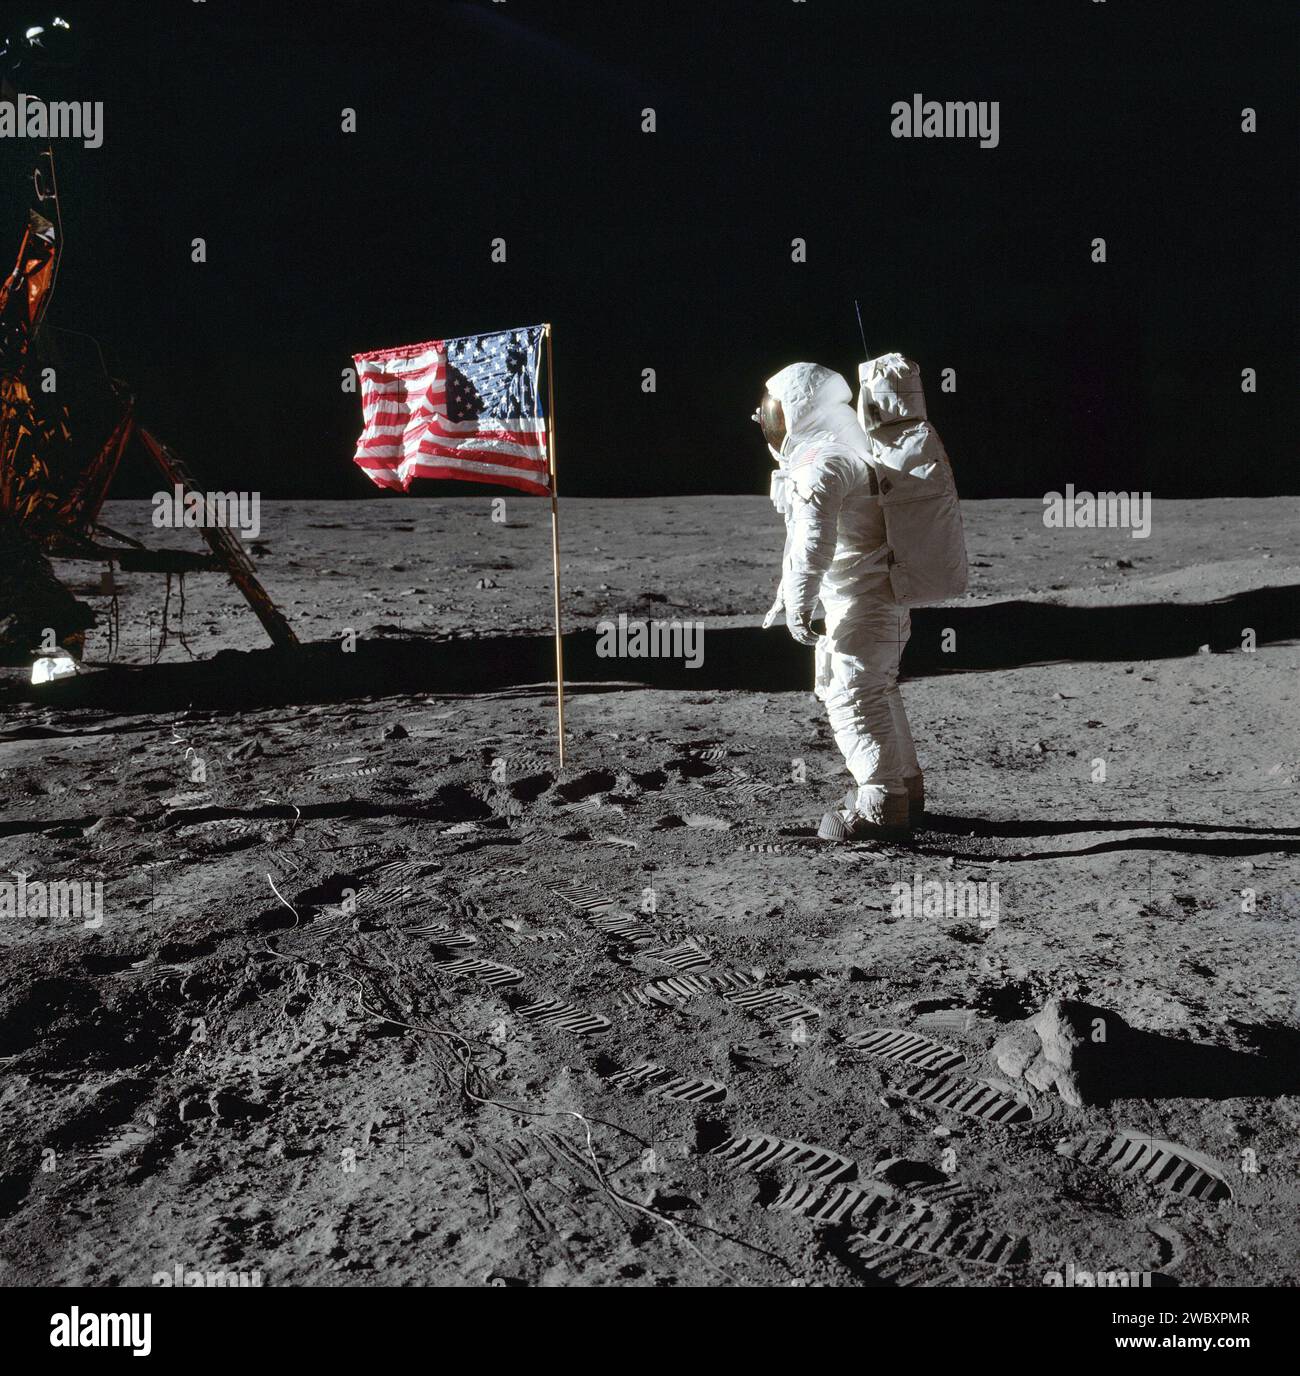 American Astronaut Edwin E. Aldrin Jr., lunar module pilot of first lunar landing mission, near United States flag during Apollo 11 extravehicular activity on moon surface, photo by Neil Armstrong, Johnson Space Center, NASA July 21, 1969 Stock Photo